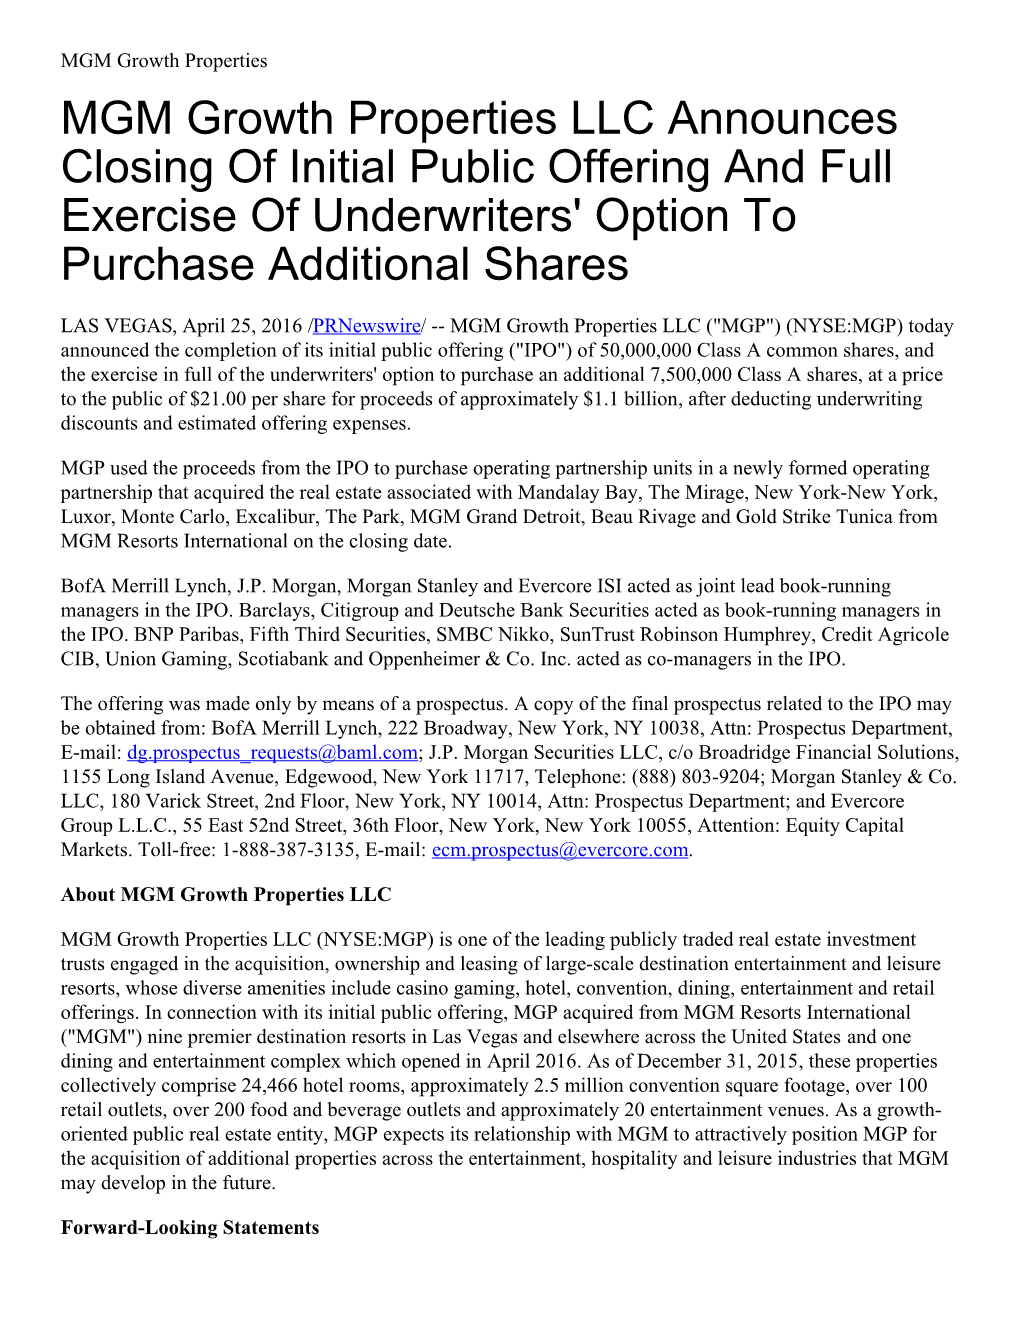 MGM Growth Properties LLC Announces Closing of Initial Public Offering and Full Exercise of Underwriters' Option to Purchase Additional Shares